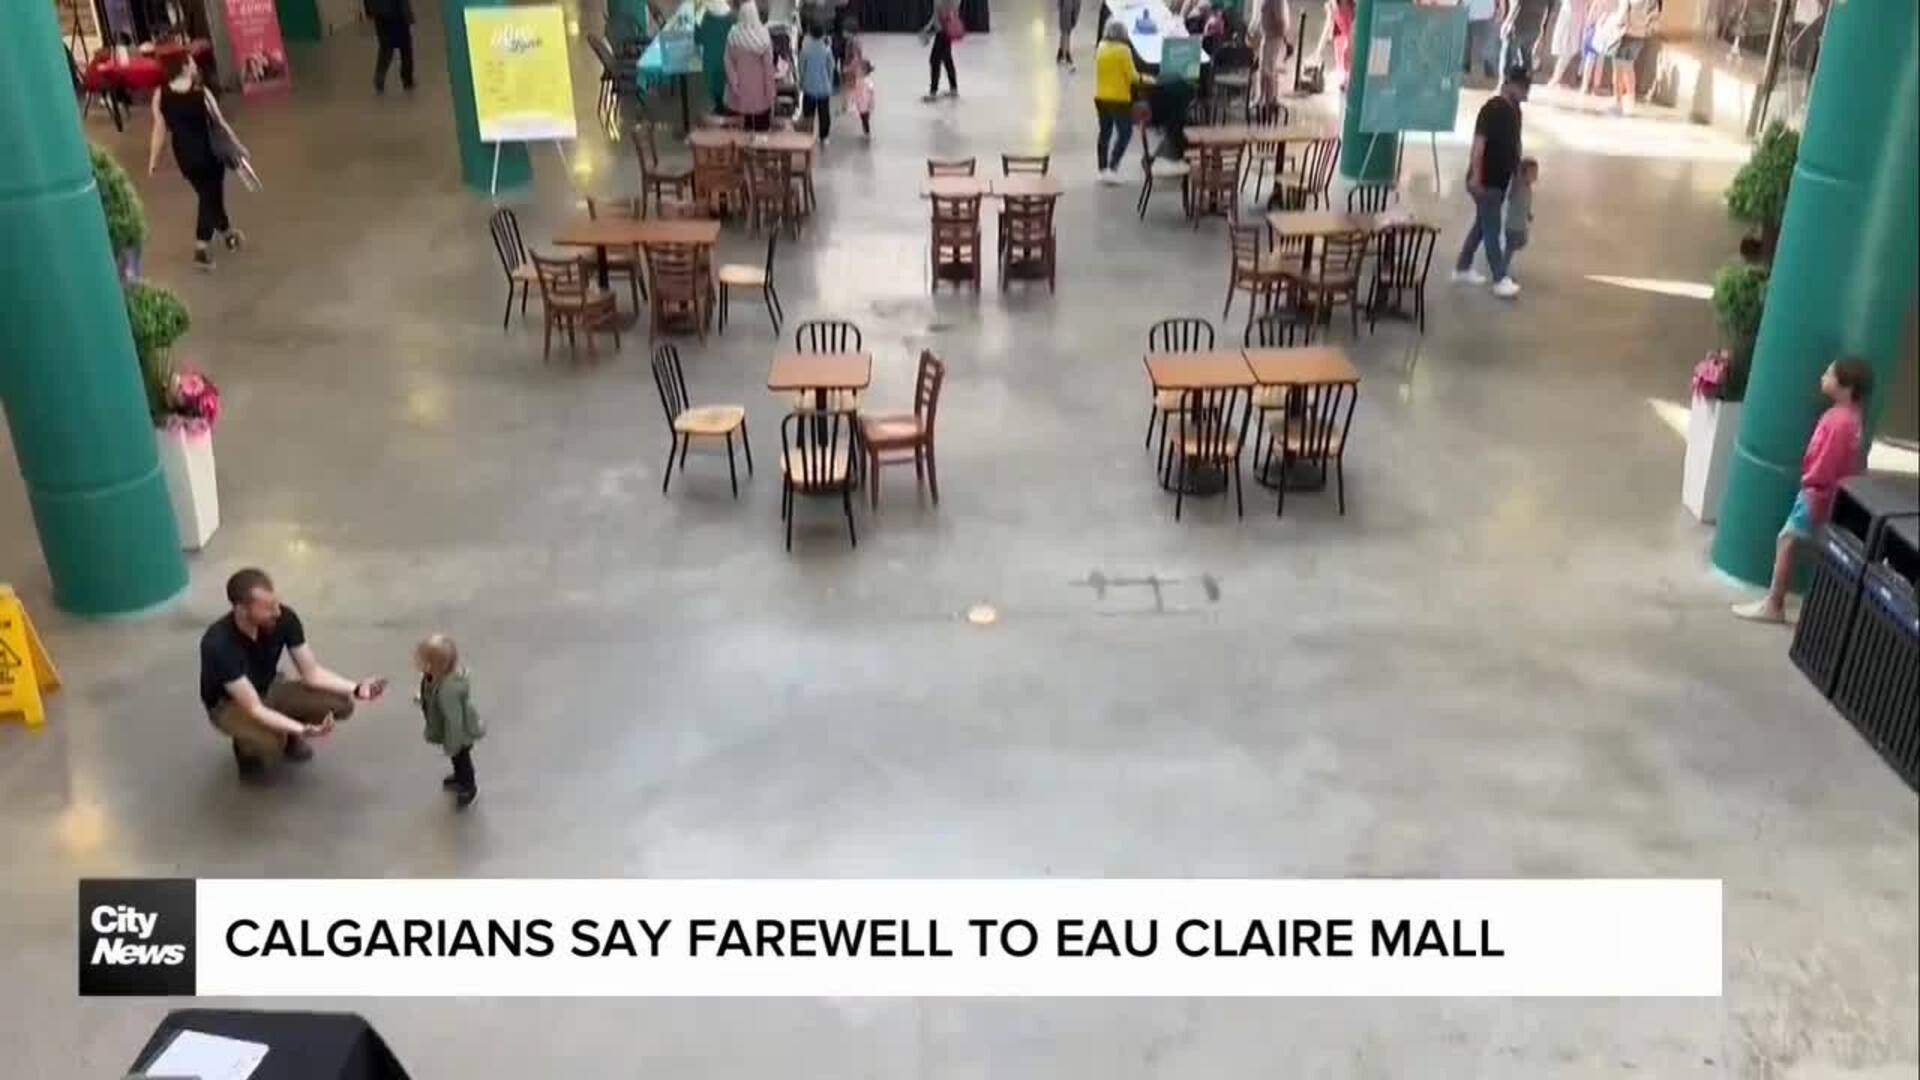 Saying farewell to Calgary’s Eau Claire Mall